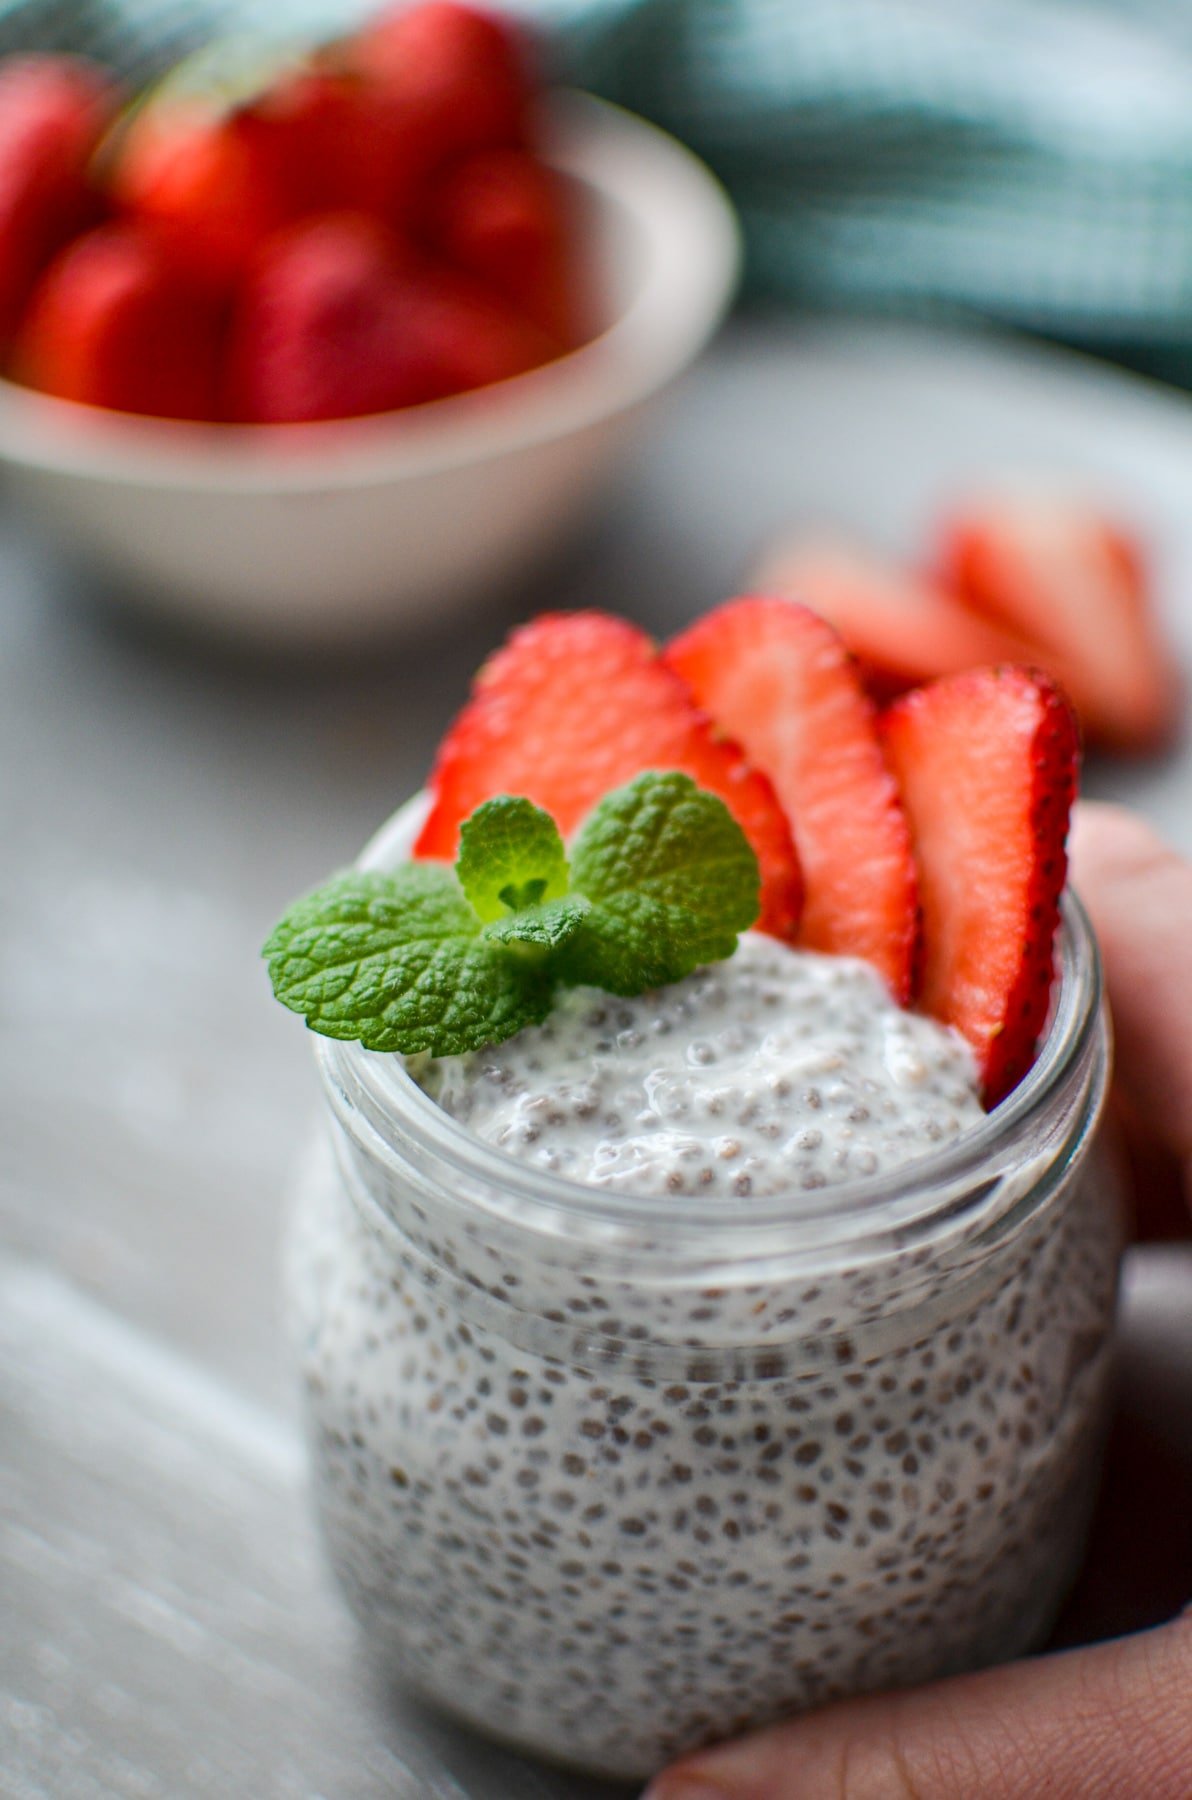 A hand reaching in to grab a jar of chia pudding.